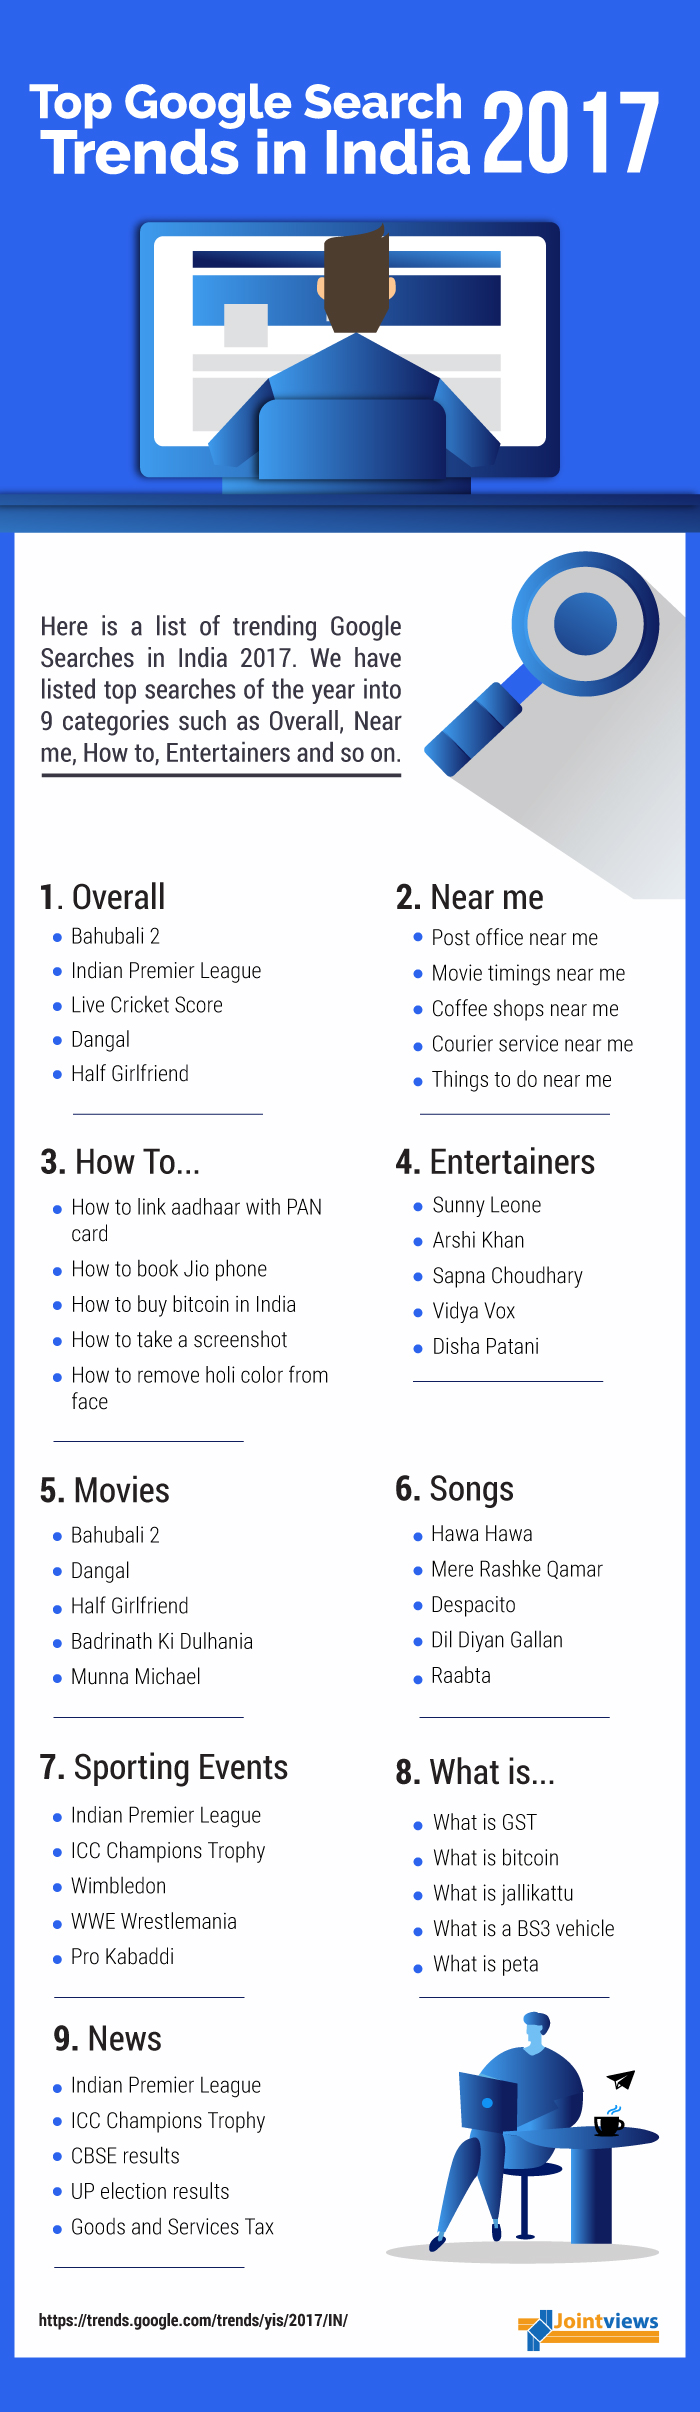 Top-Google-Search-Trends-in-India-2017-infographic-plaza